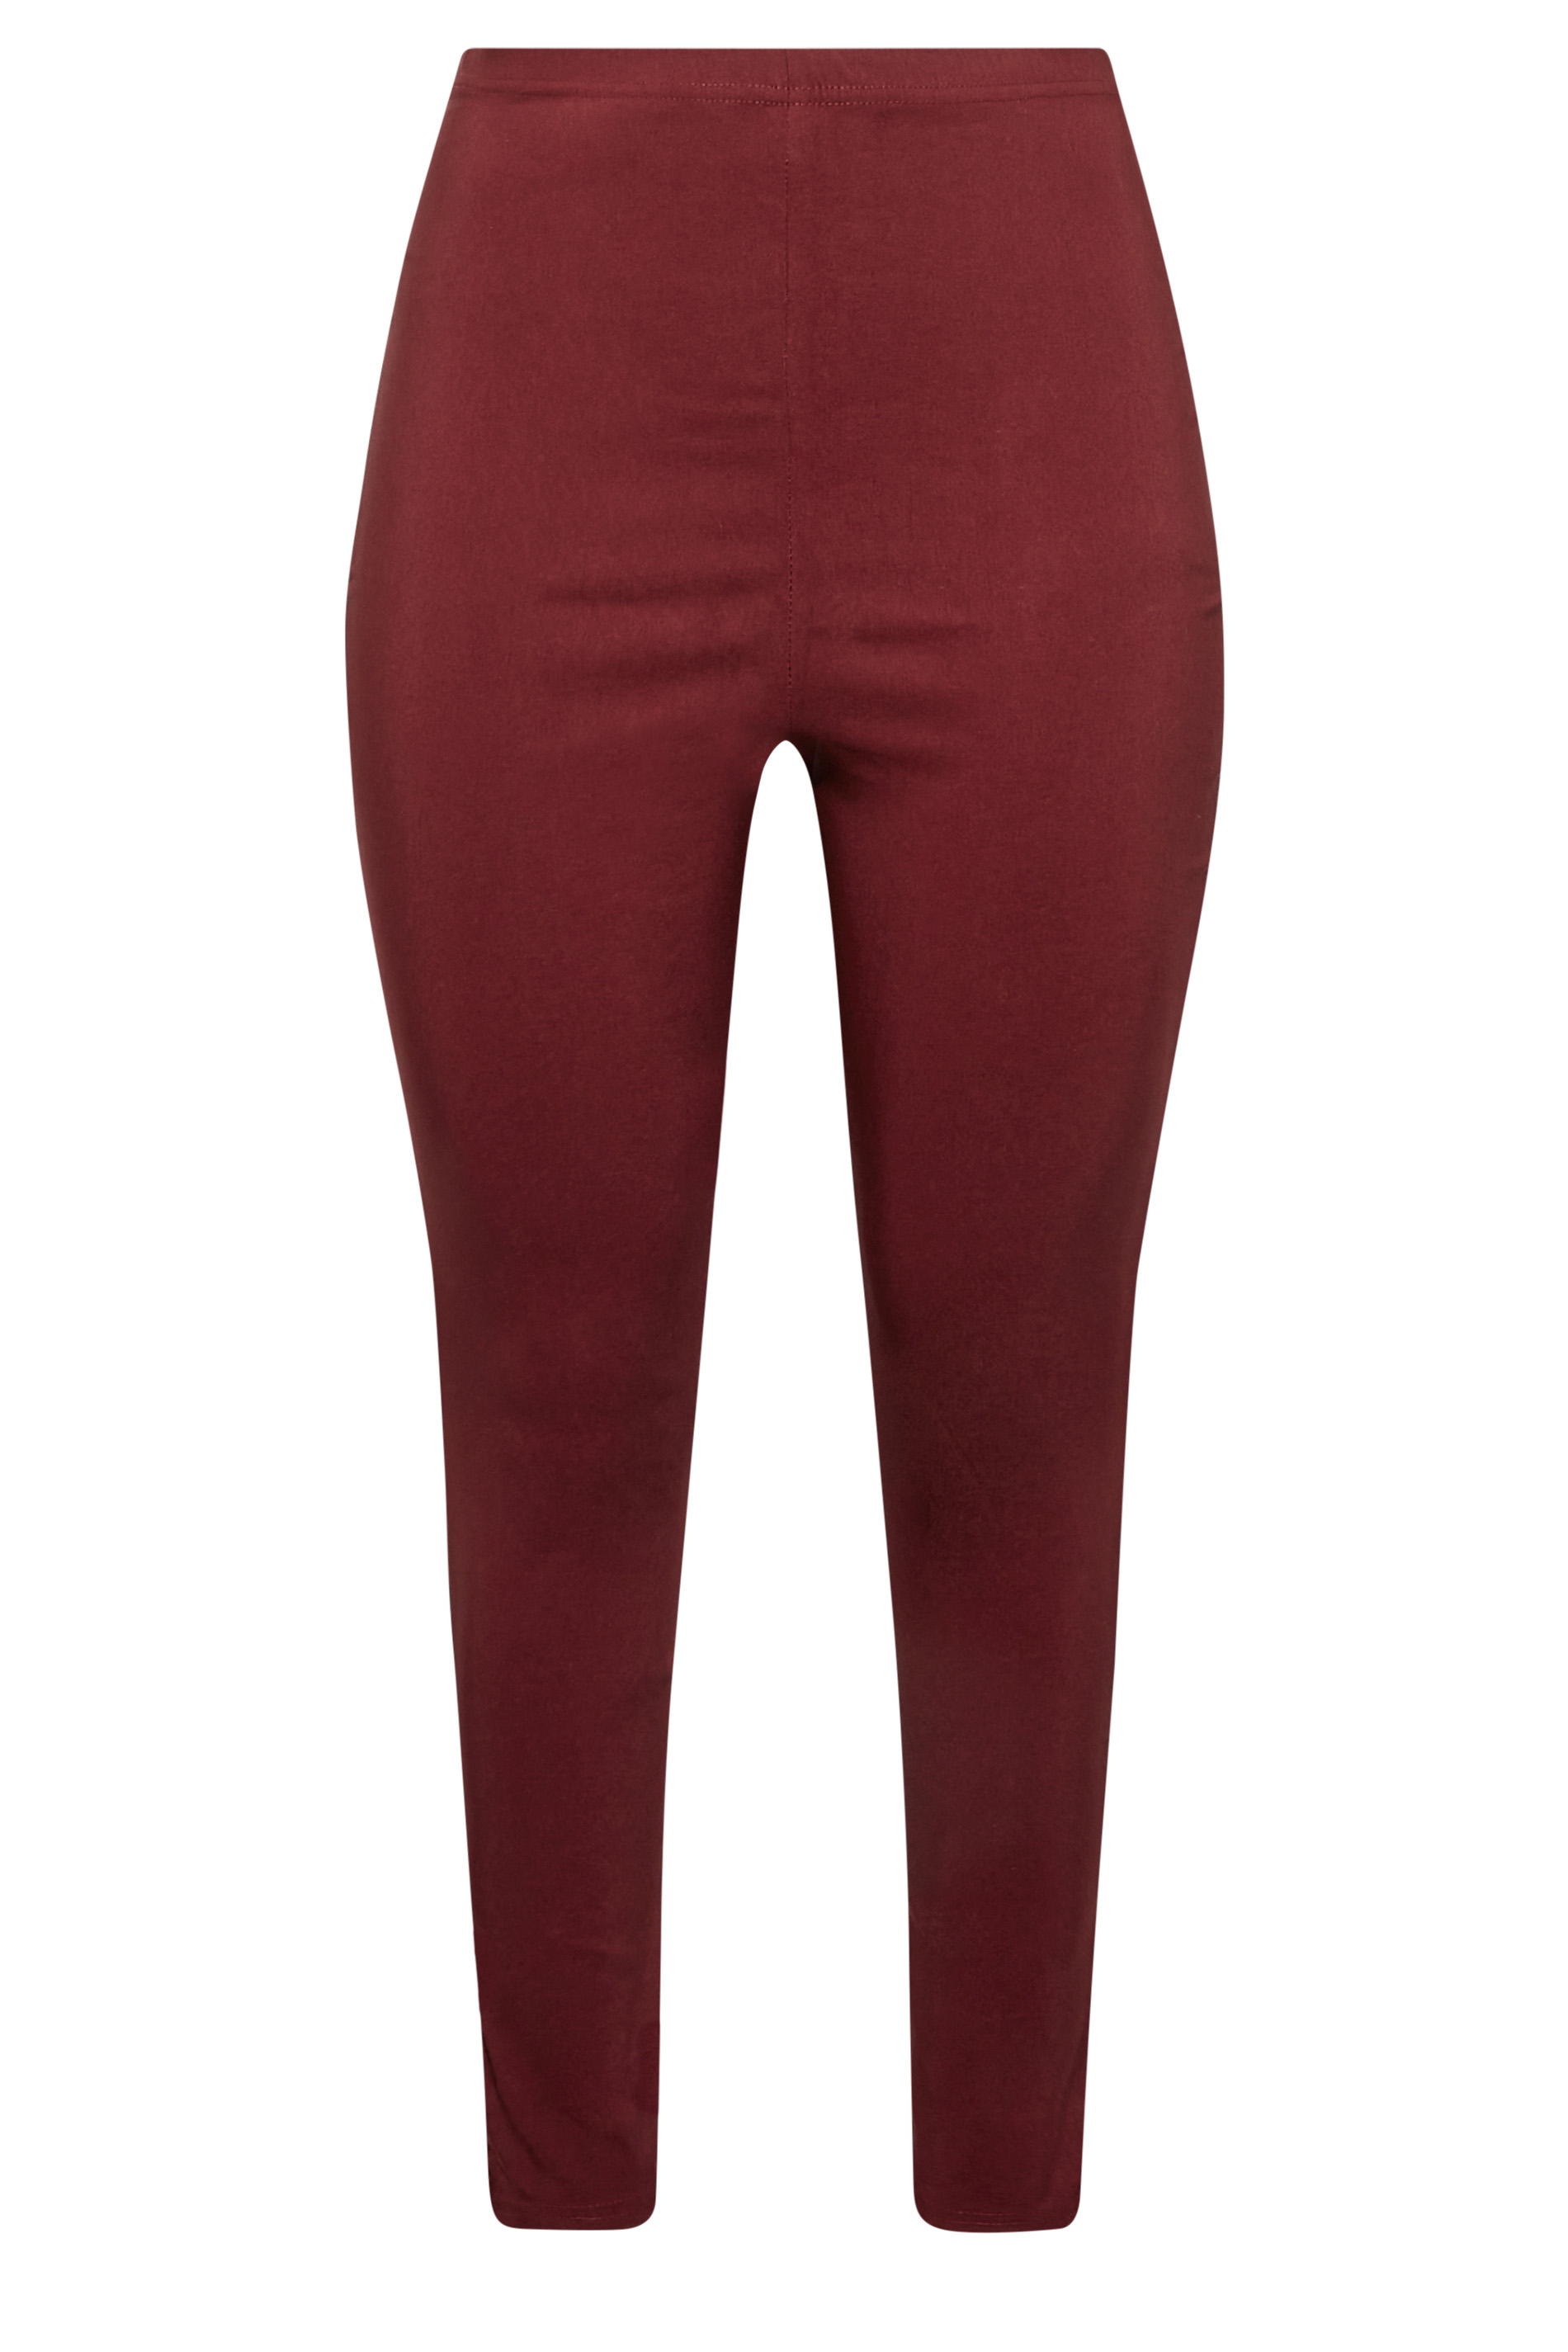 Curve Plus Size Burgundy Red Bengaline Pull On Stretch Trousers - Petite 1